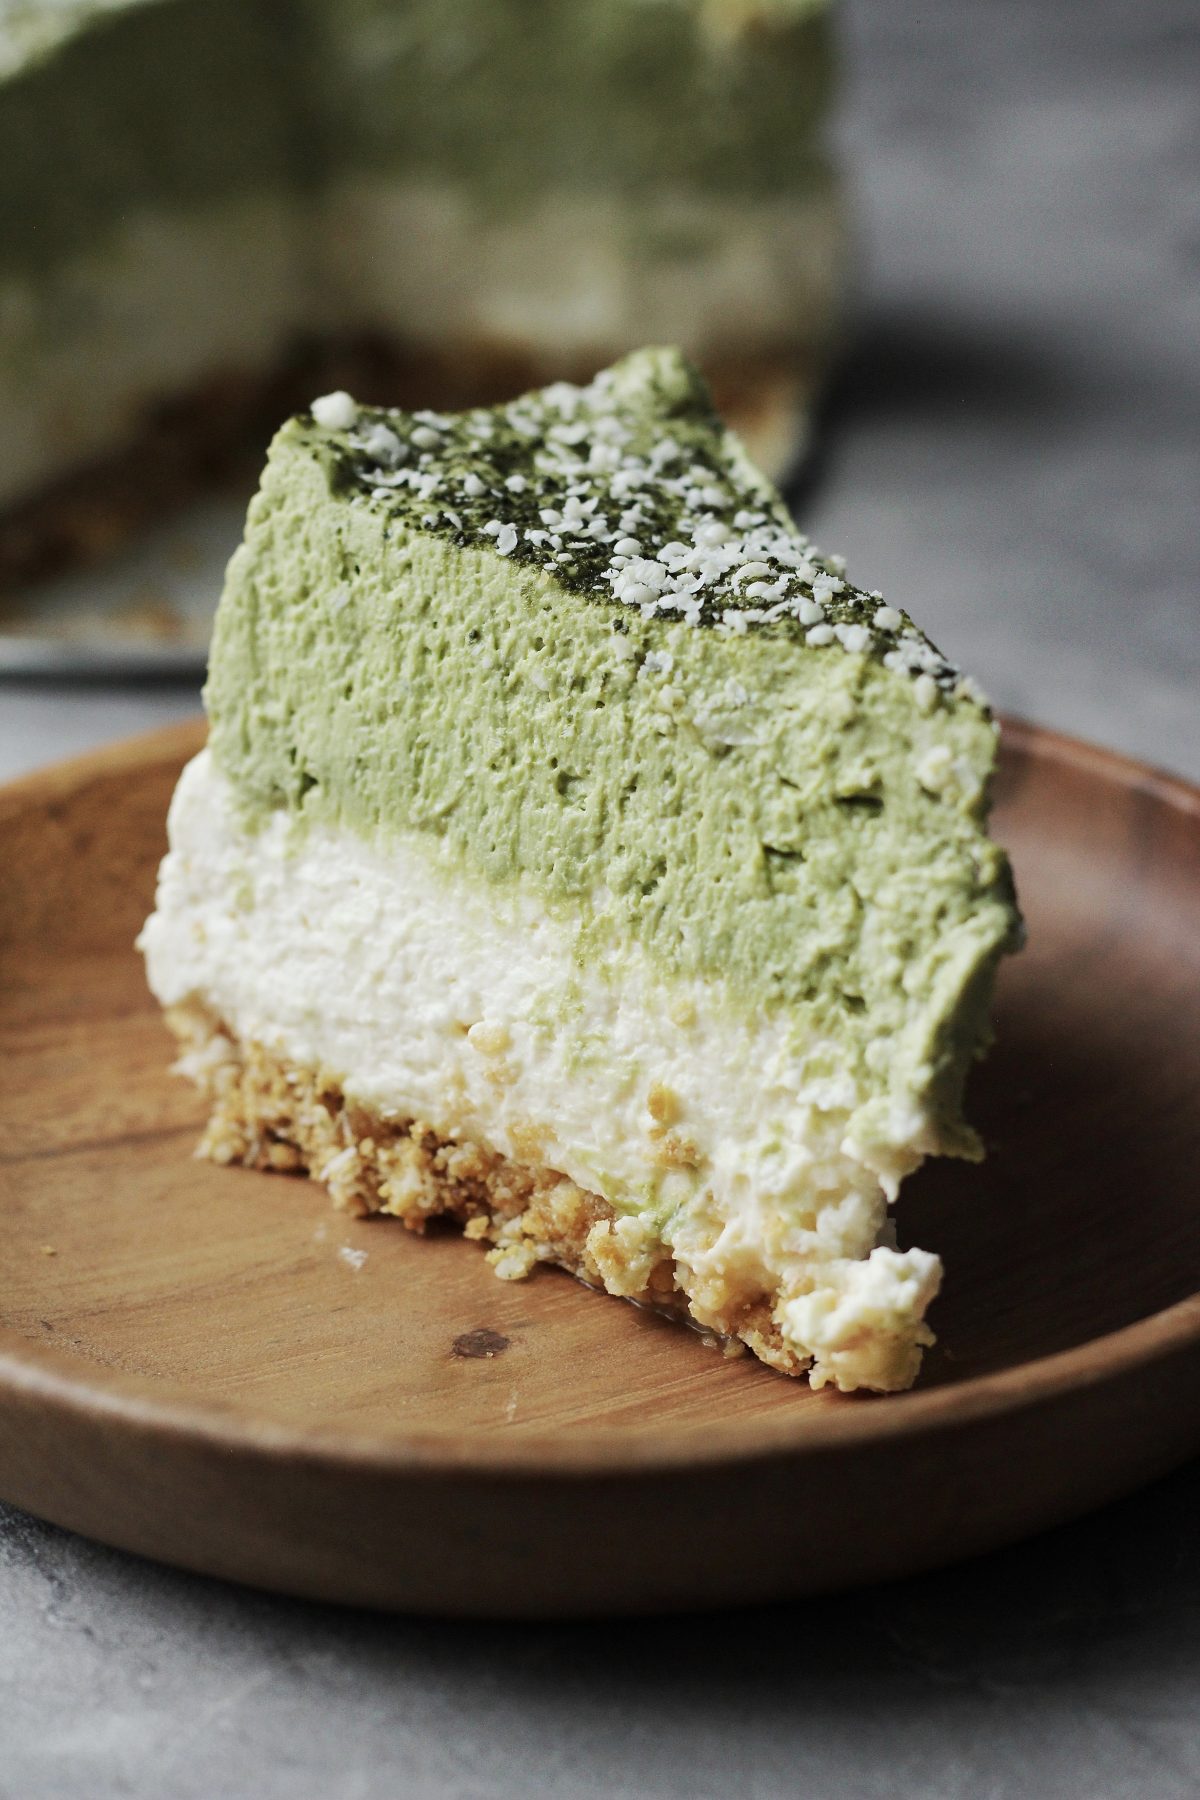 A slice of our no-bake Matcha green tea cheesecake on a wooden plate.